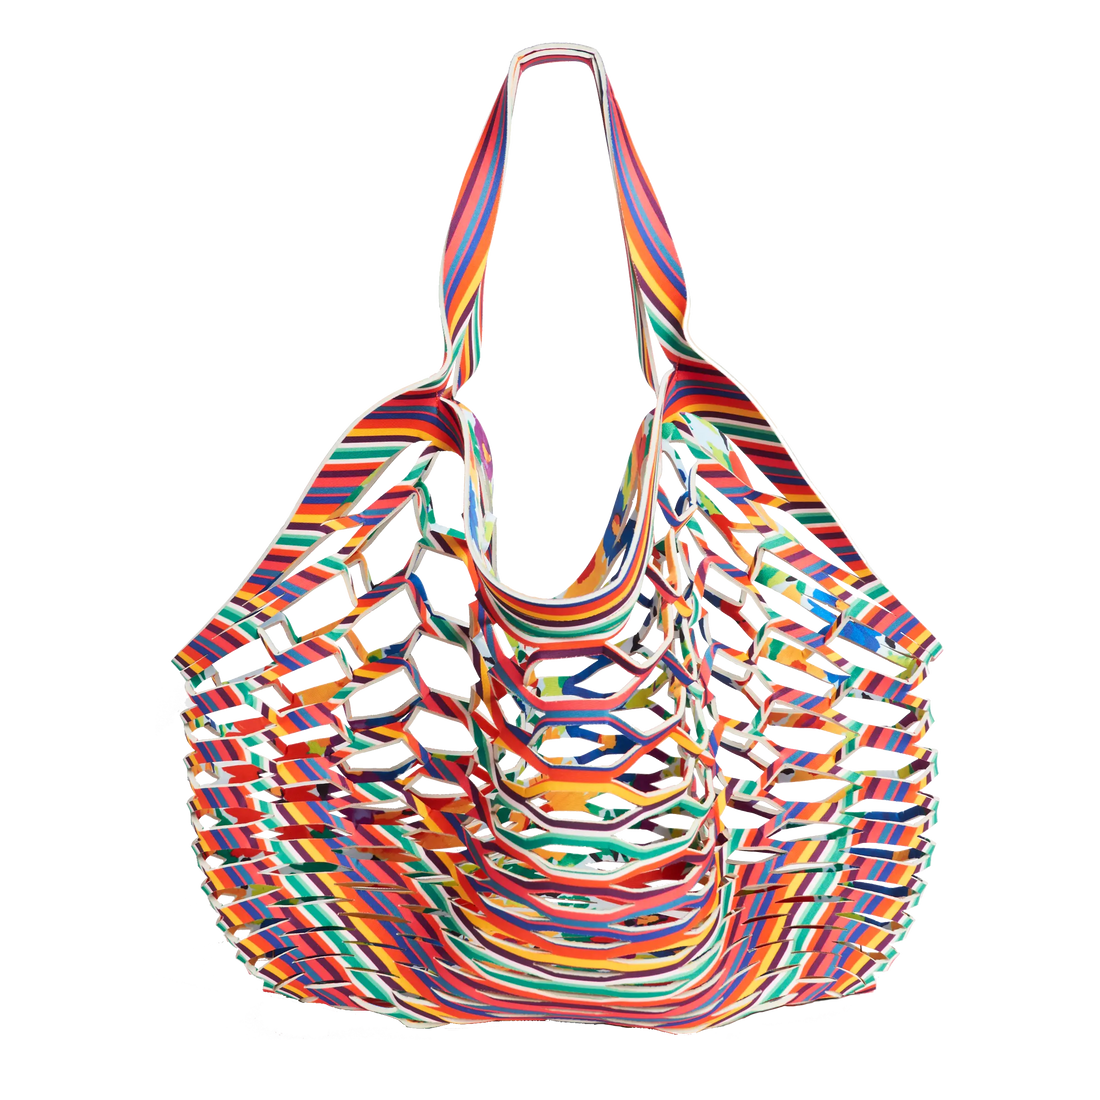 FLORAL EXPLOSION/CANDY STRIPE - FISHERMAN'S TOTE